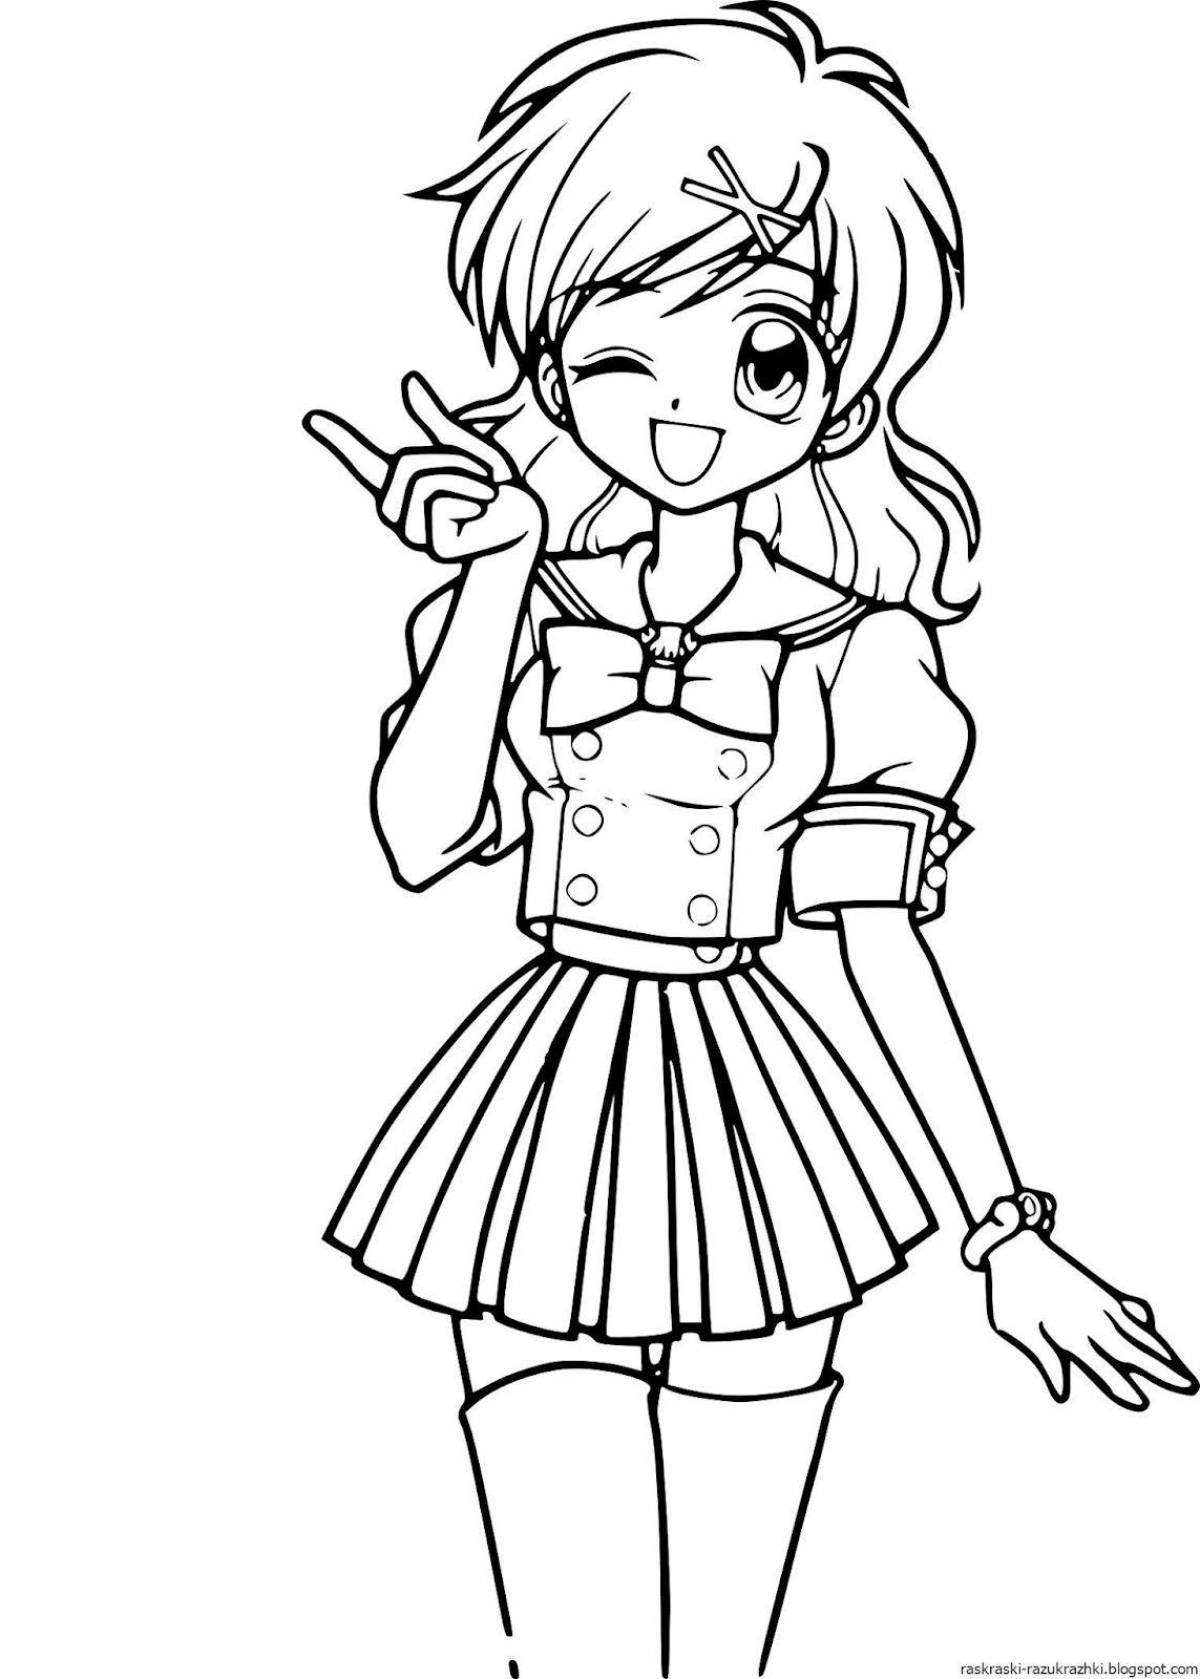 Coloring page of a persistent schoolgirl